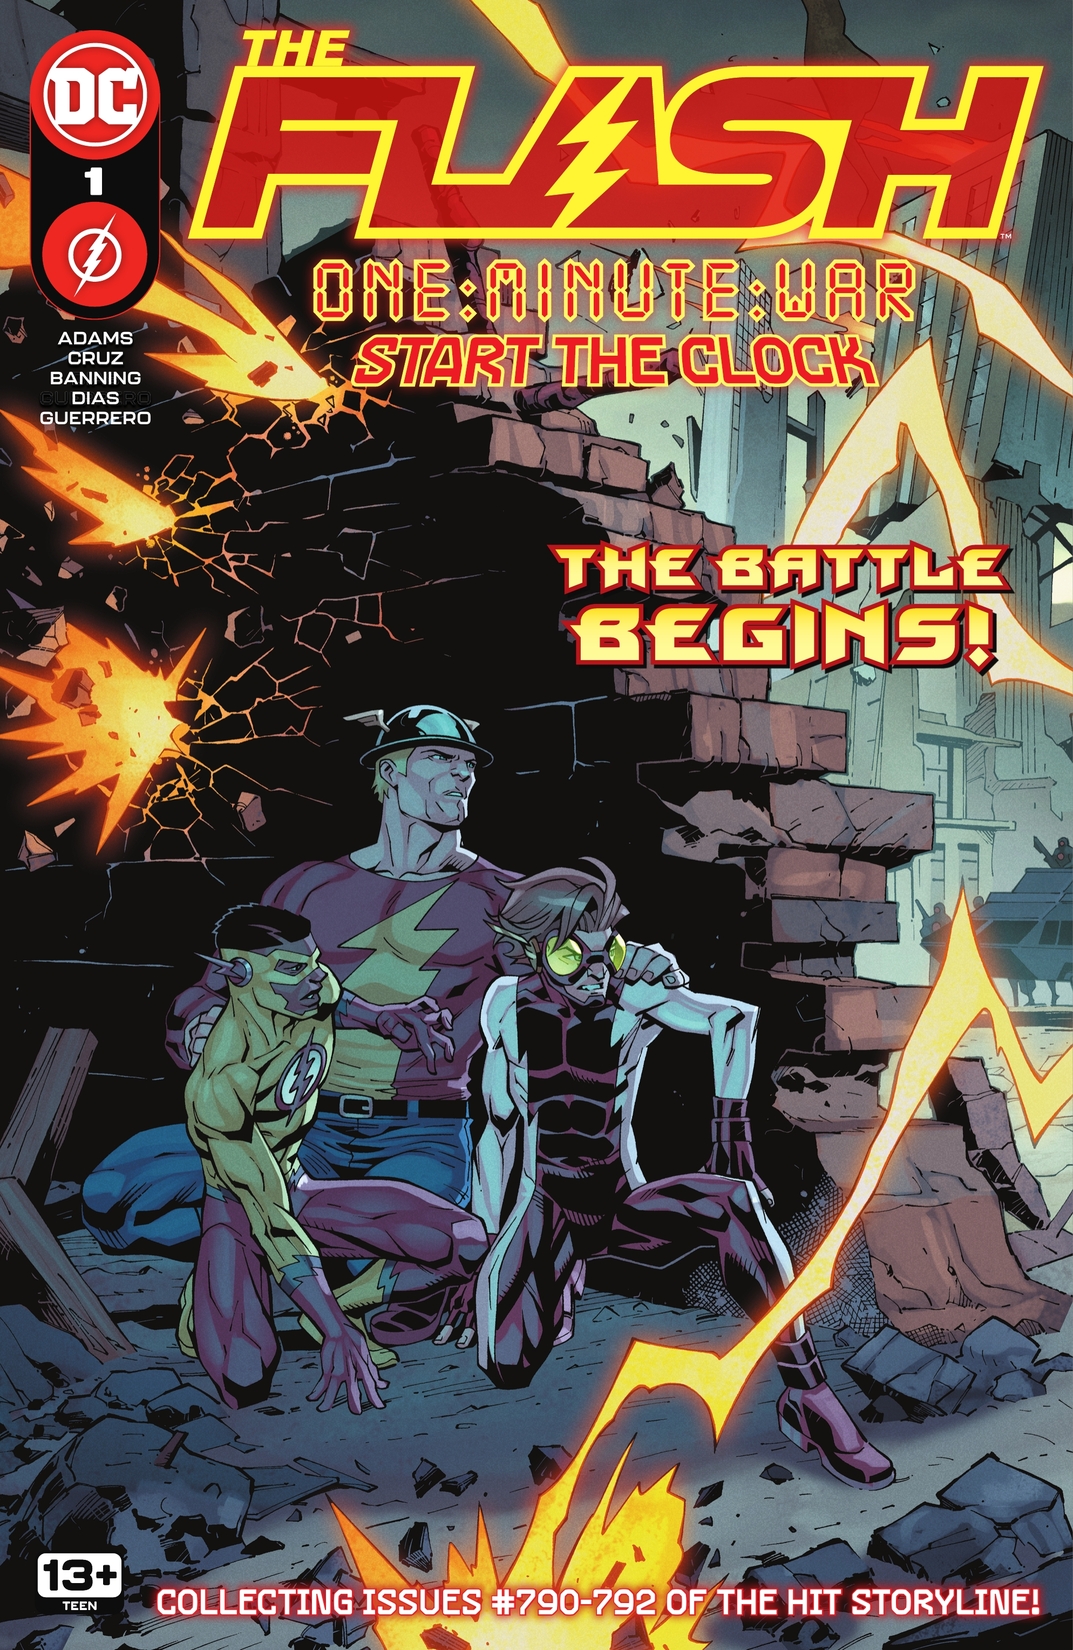 The Flash One-Minute War: Start The Clock (2023) #1 preview images